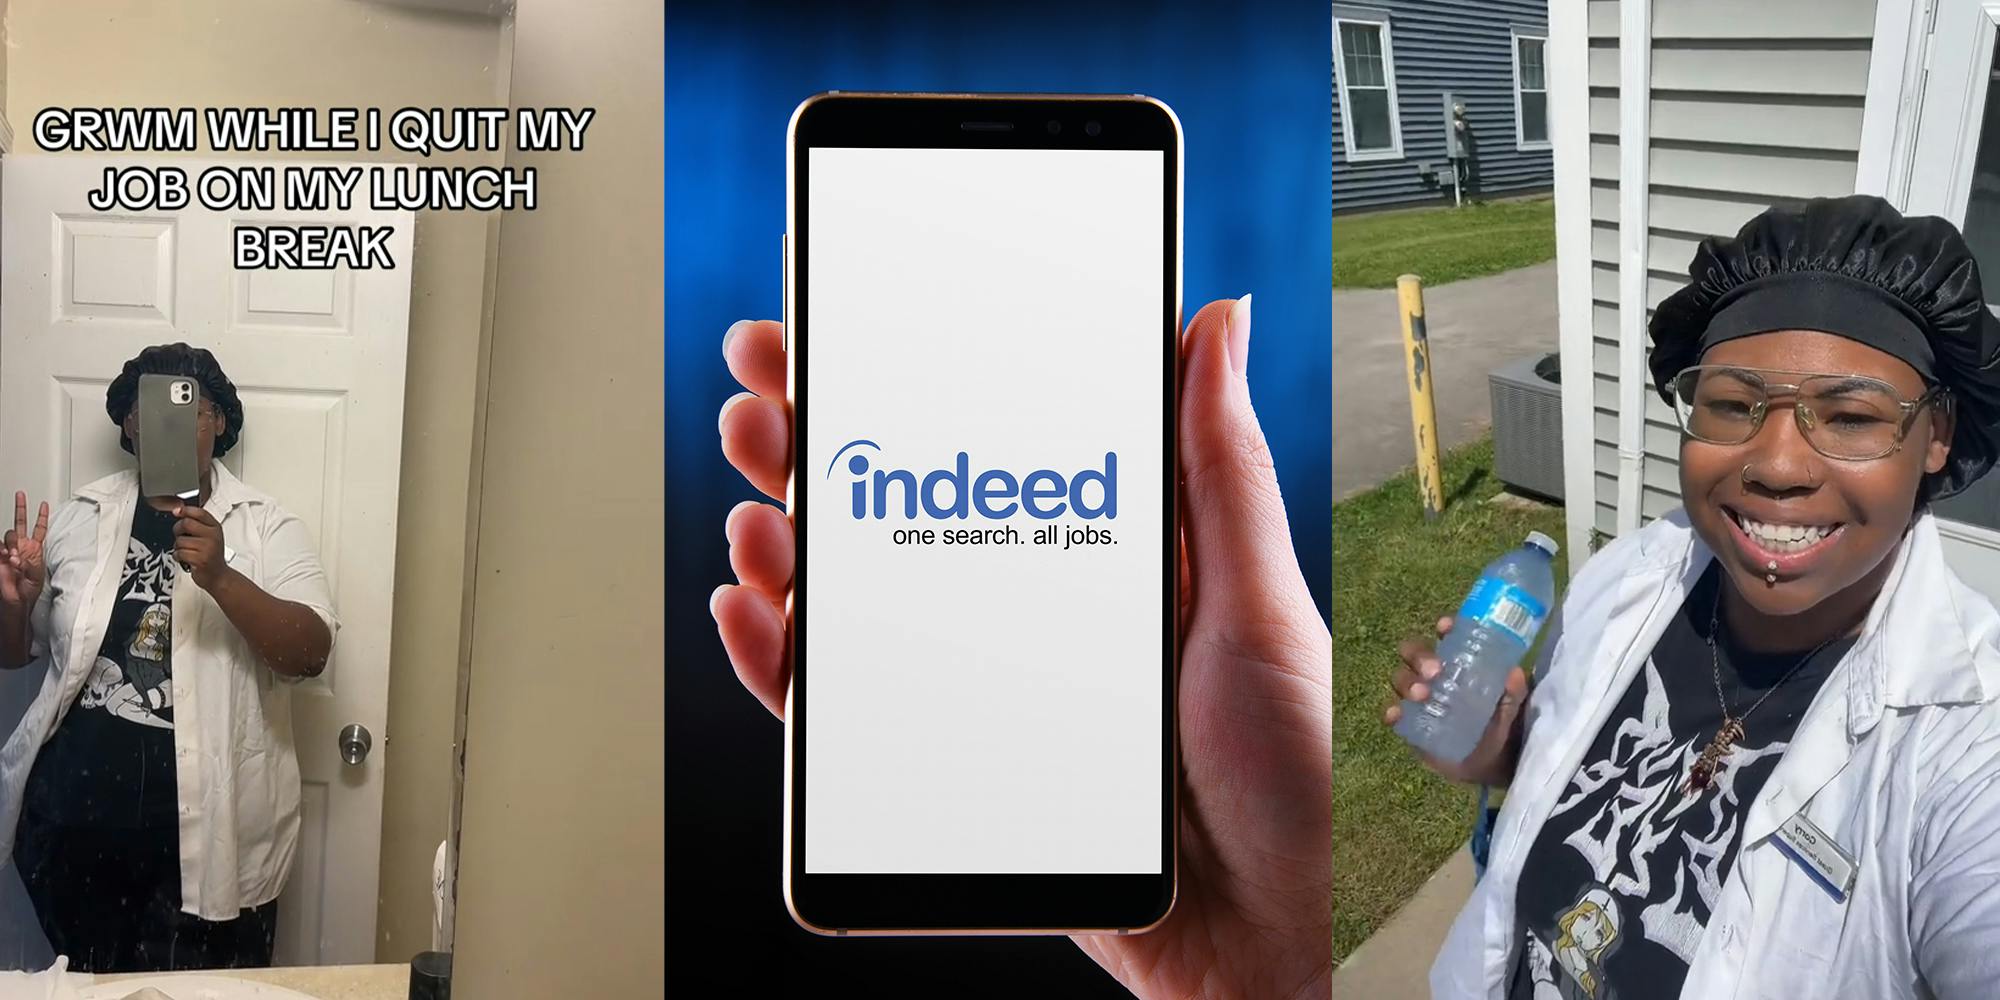 Black woman taking selfie Infront of mirror; hand holding phone with indeed logo on display; Black woman smiling holding a water bottle.